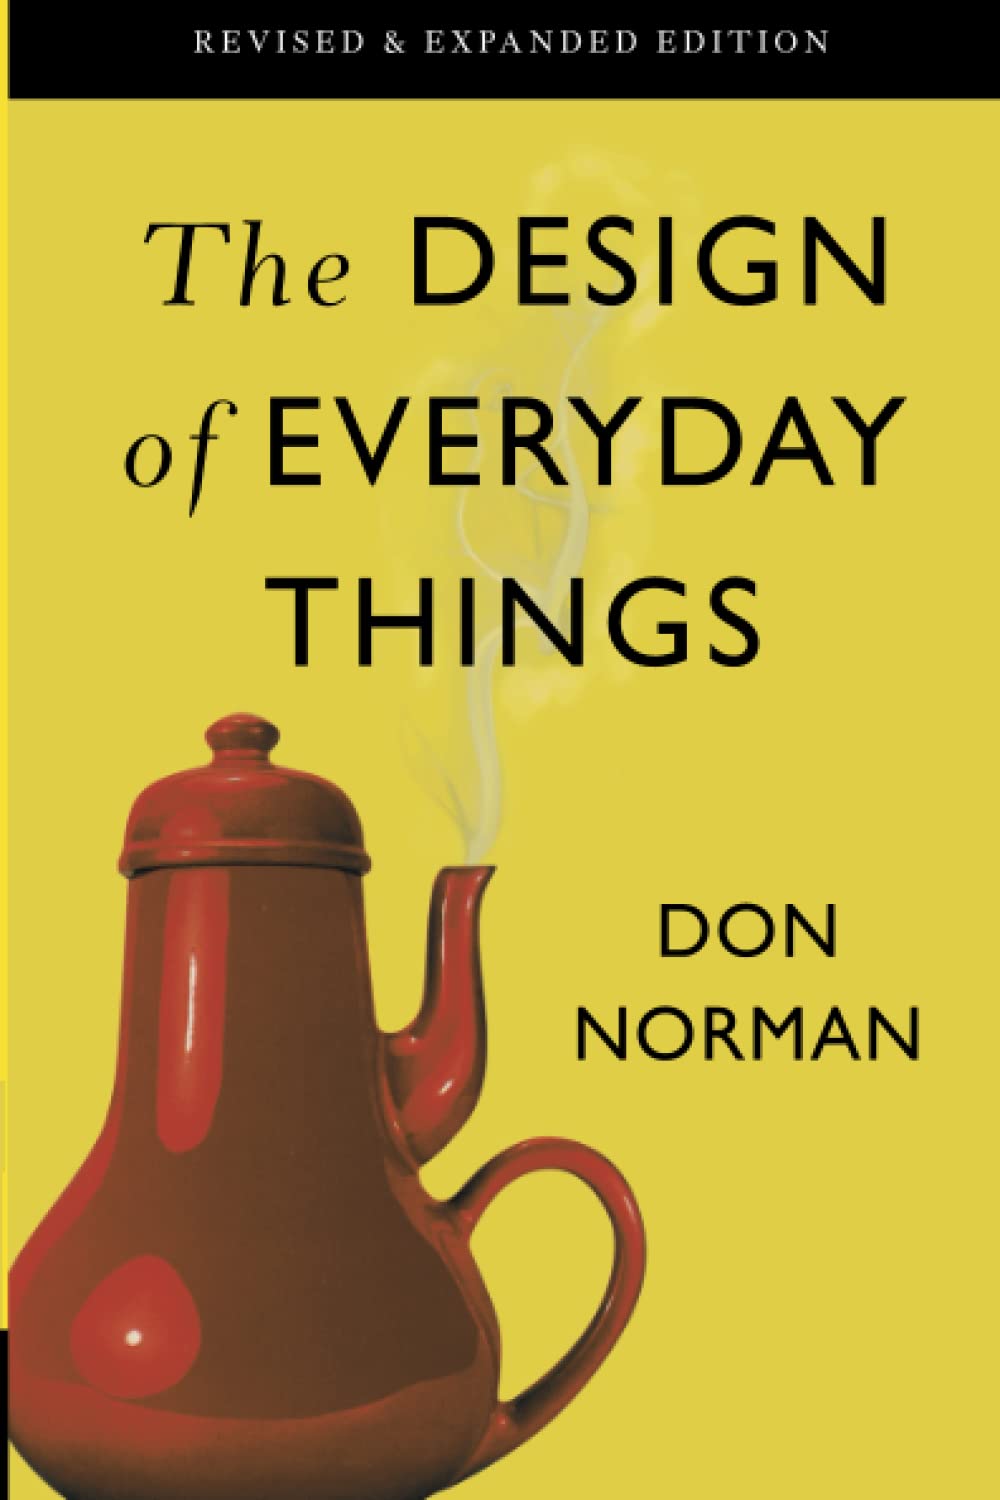 The Design of Everyday Things (revised)